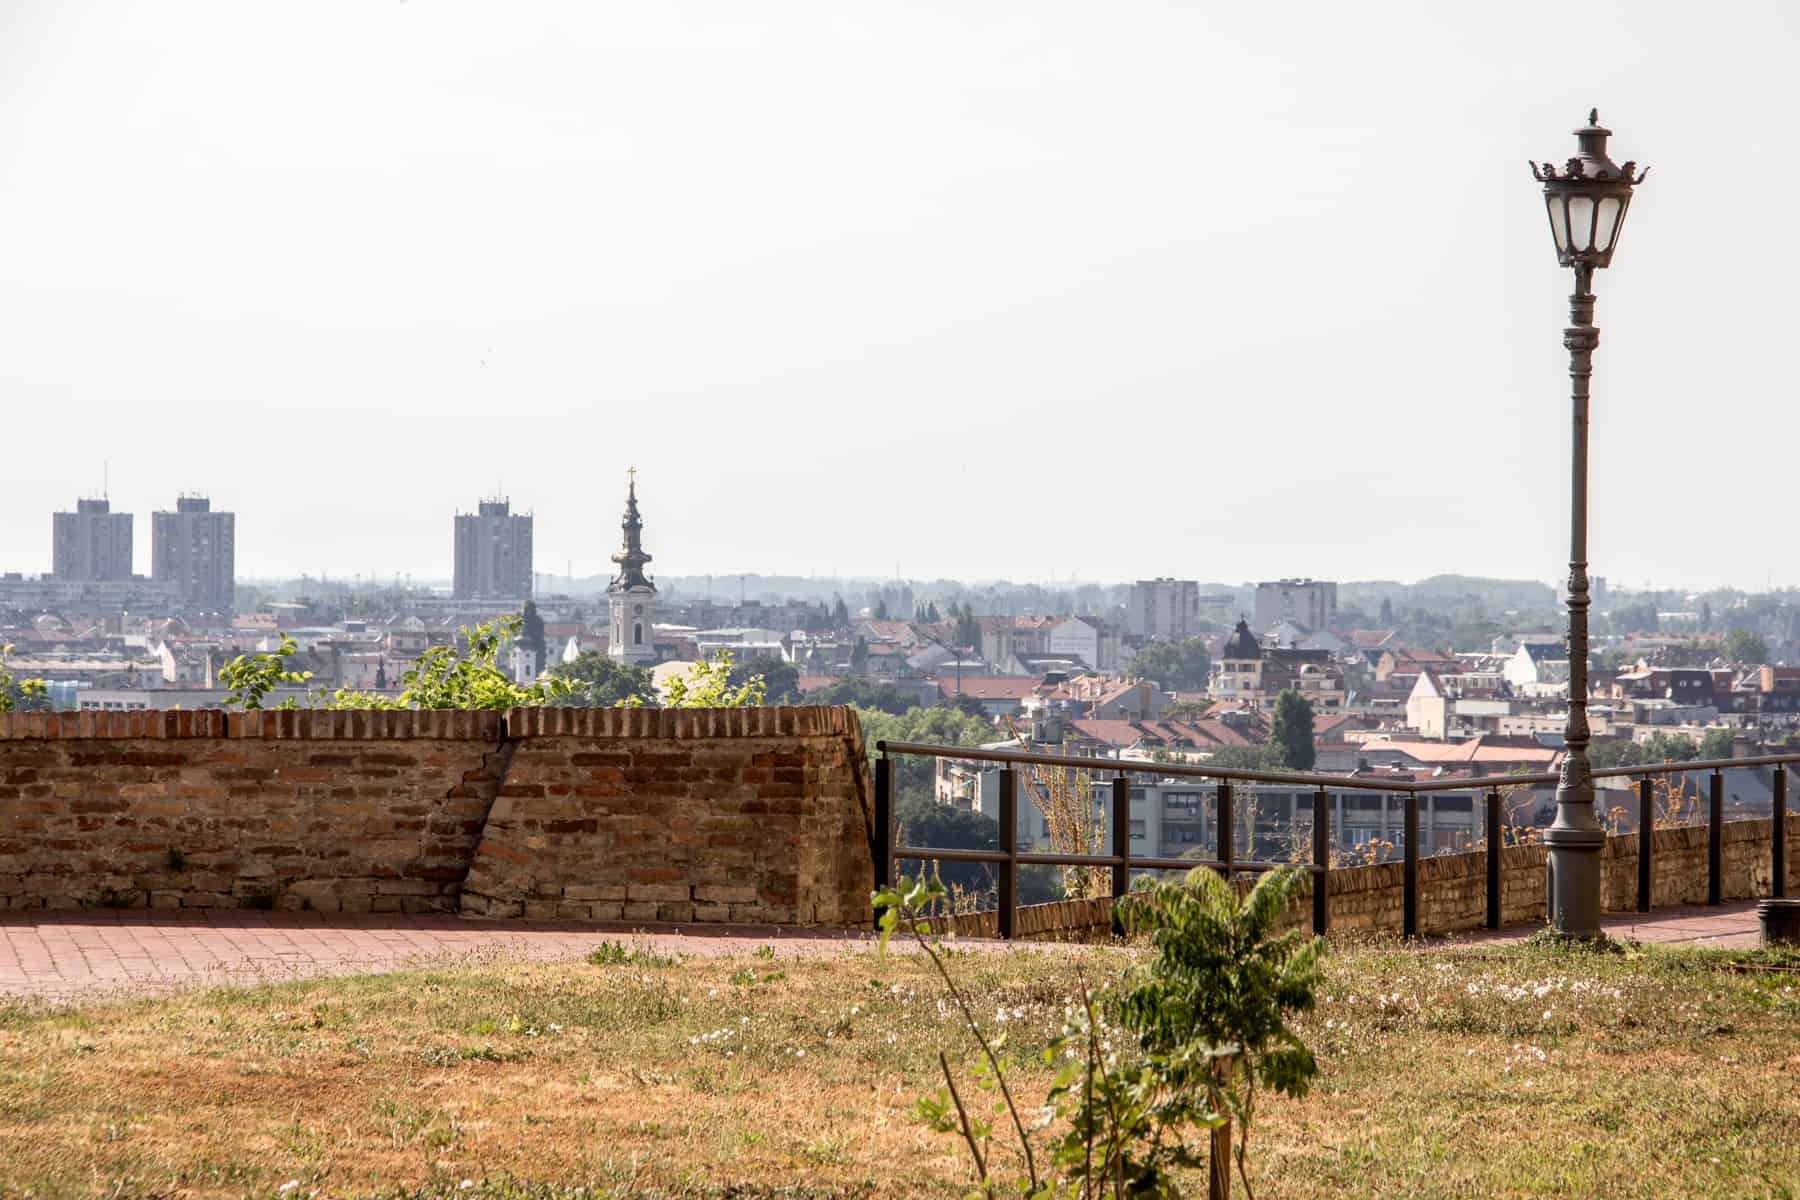 Elevated view of the Novi Sad city skyline from a grassy point with a brick wall and black lamppost in the foreground. 